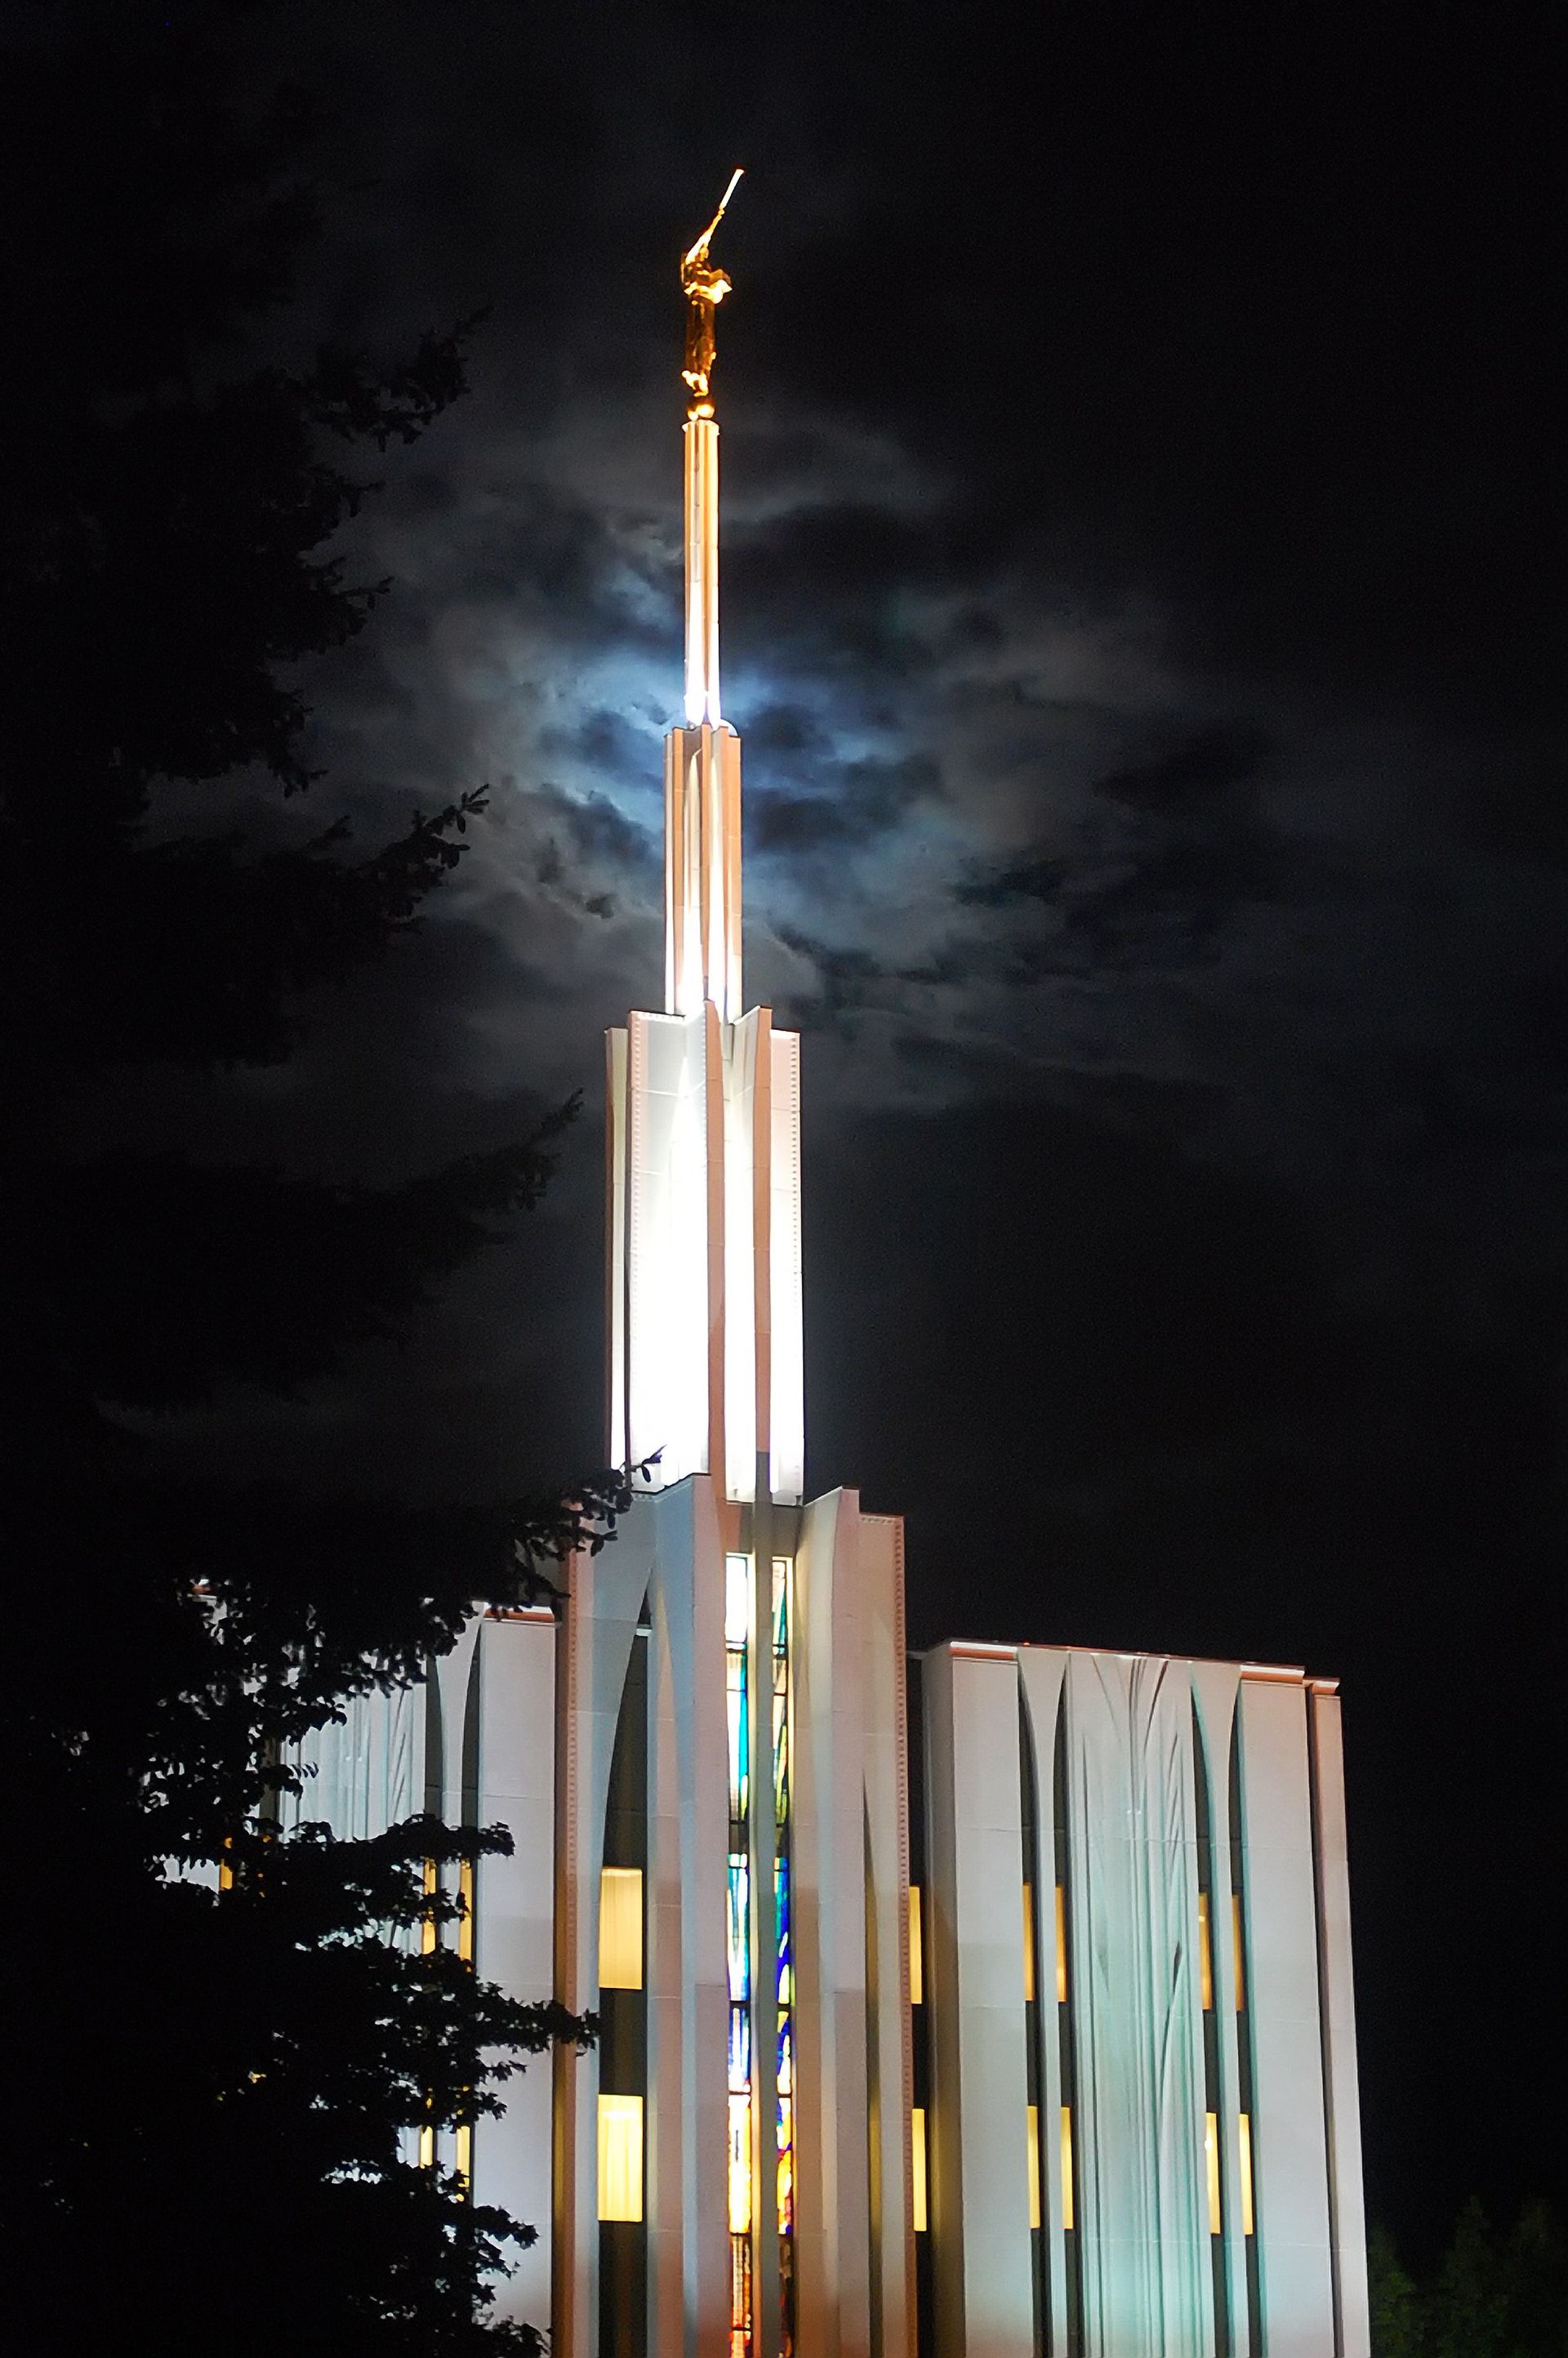 The Seattle Washington Temple in the evening, including the spire, windows, and scenery.